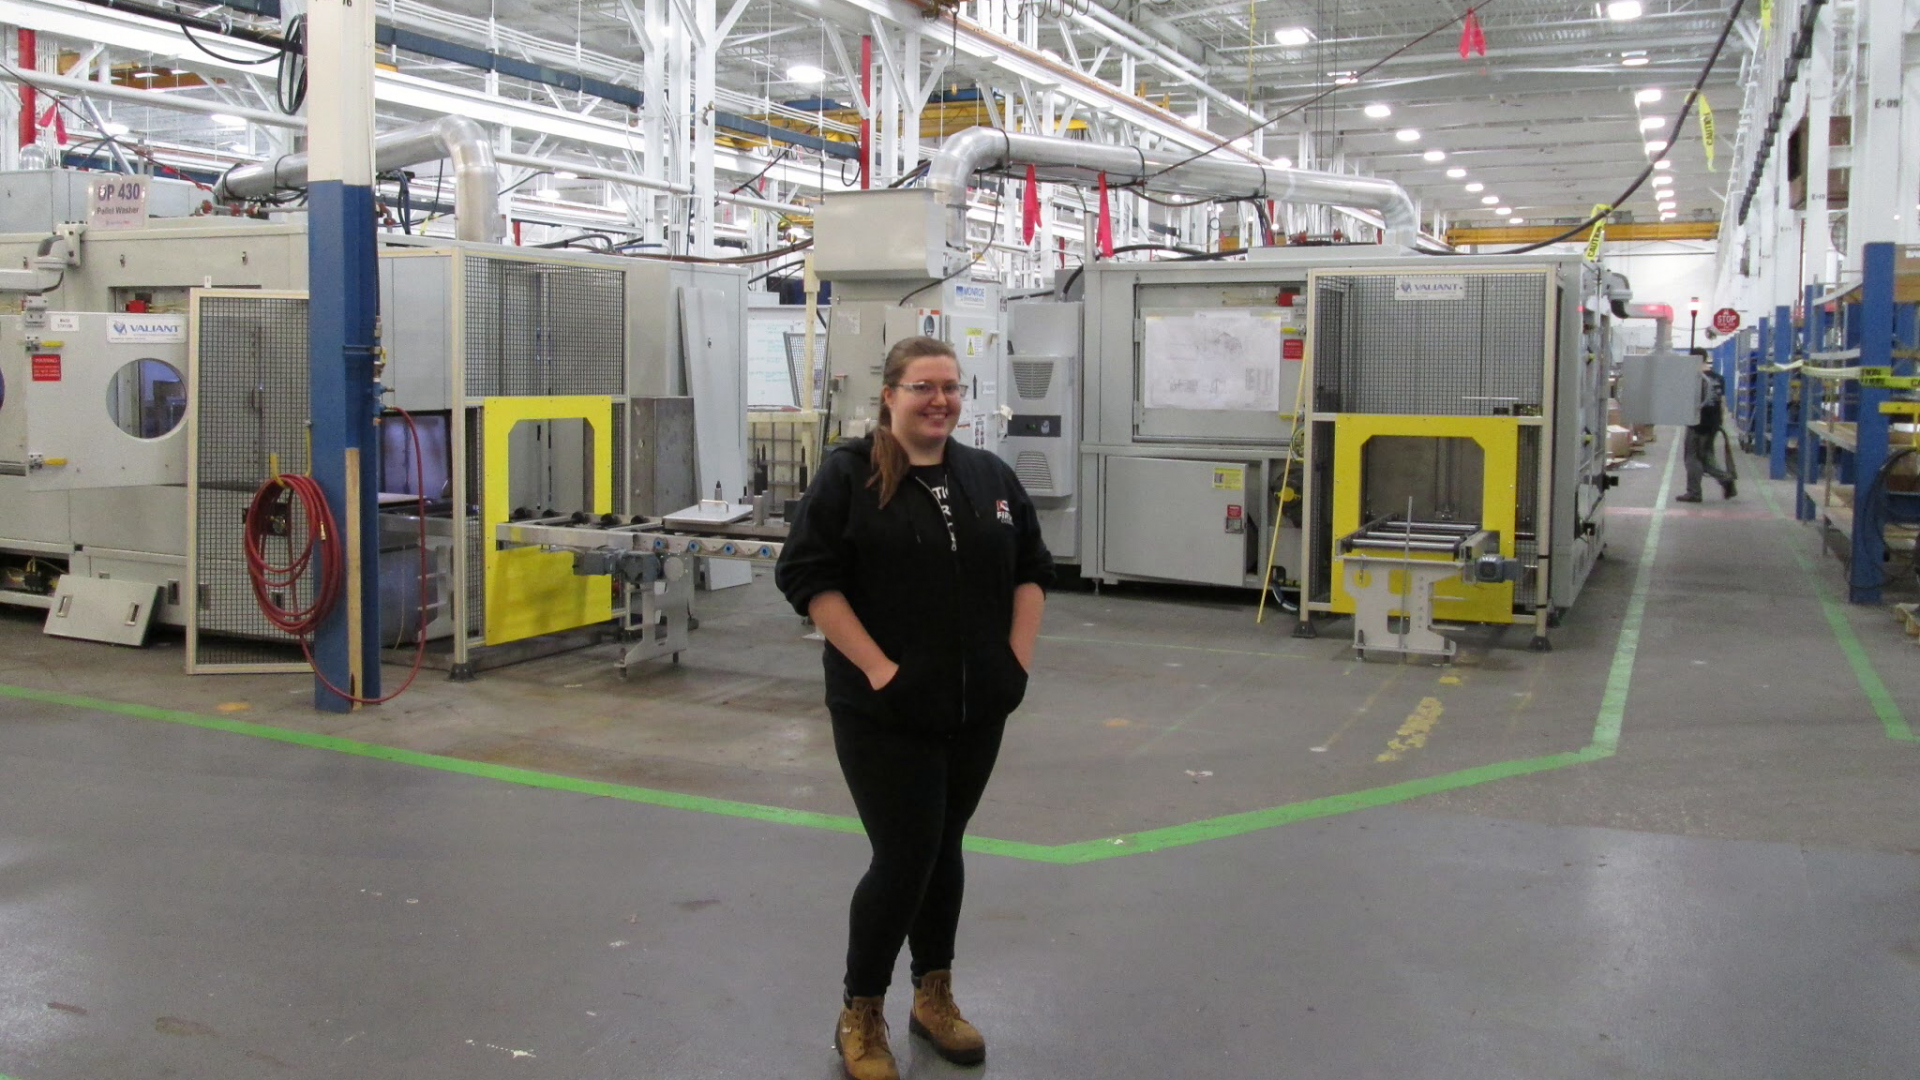 Woman posing inside manufacturing facility